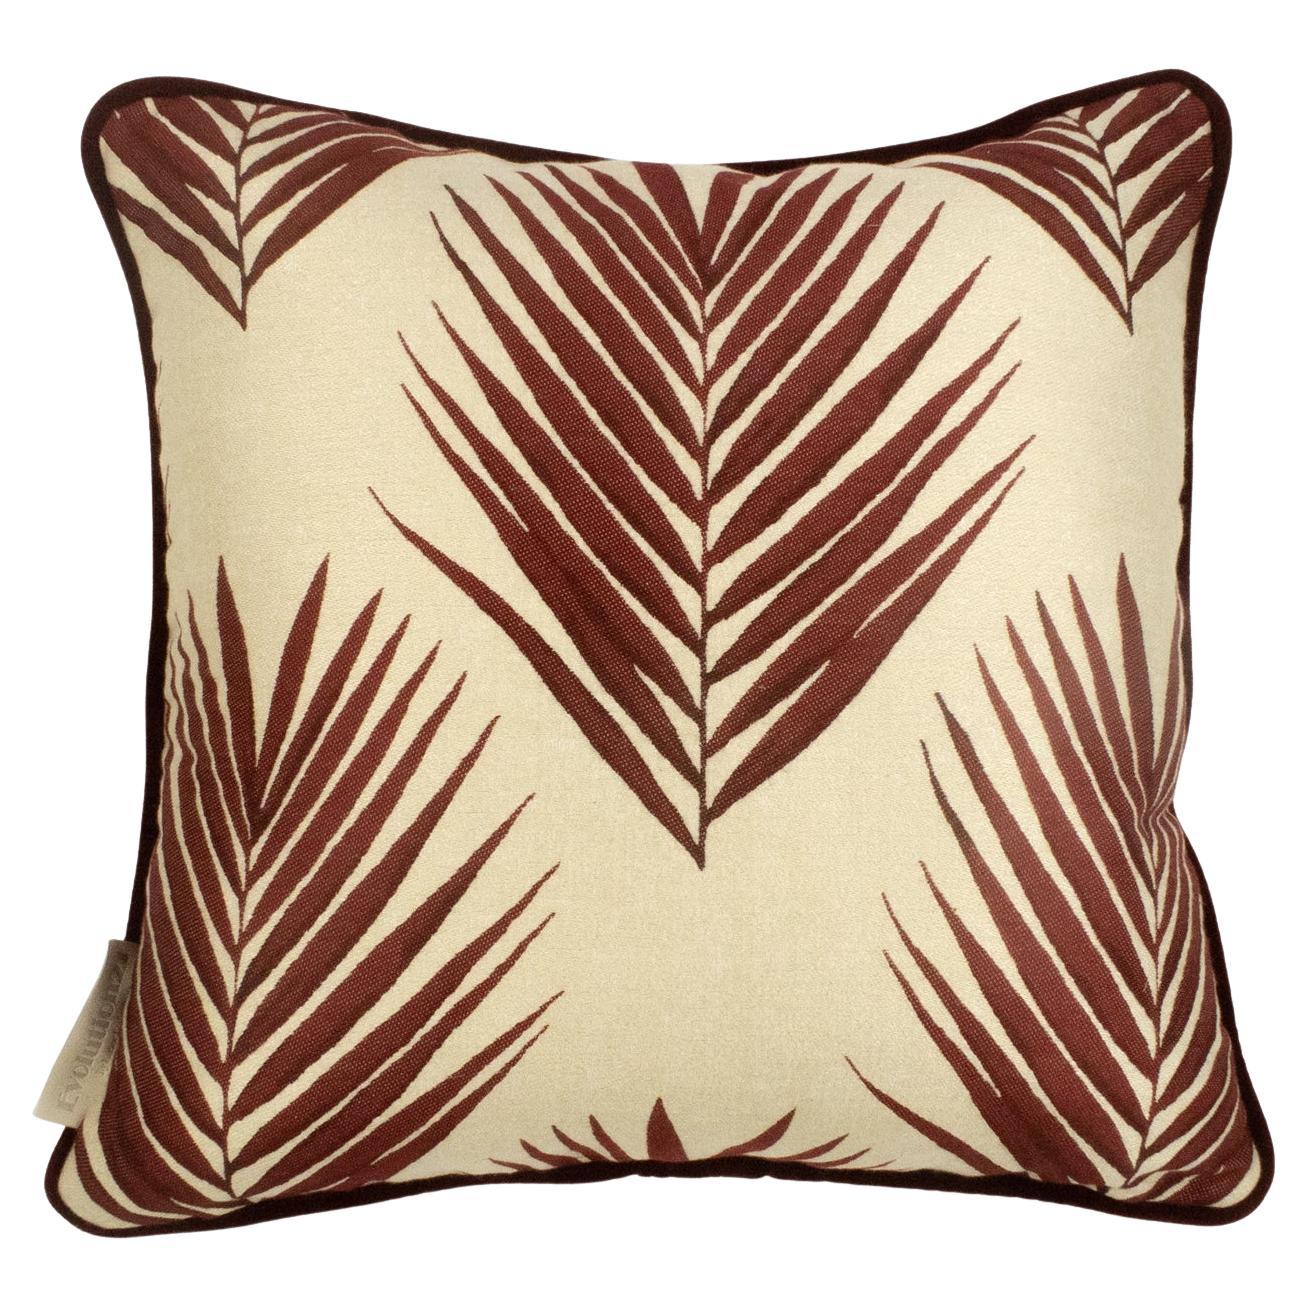 Cushion / Pillow Patterned Bamboo Leaf Red by Evolution21